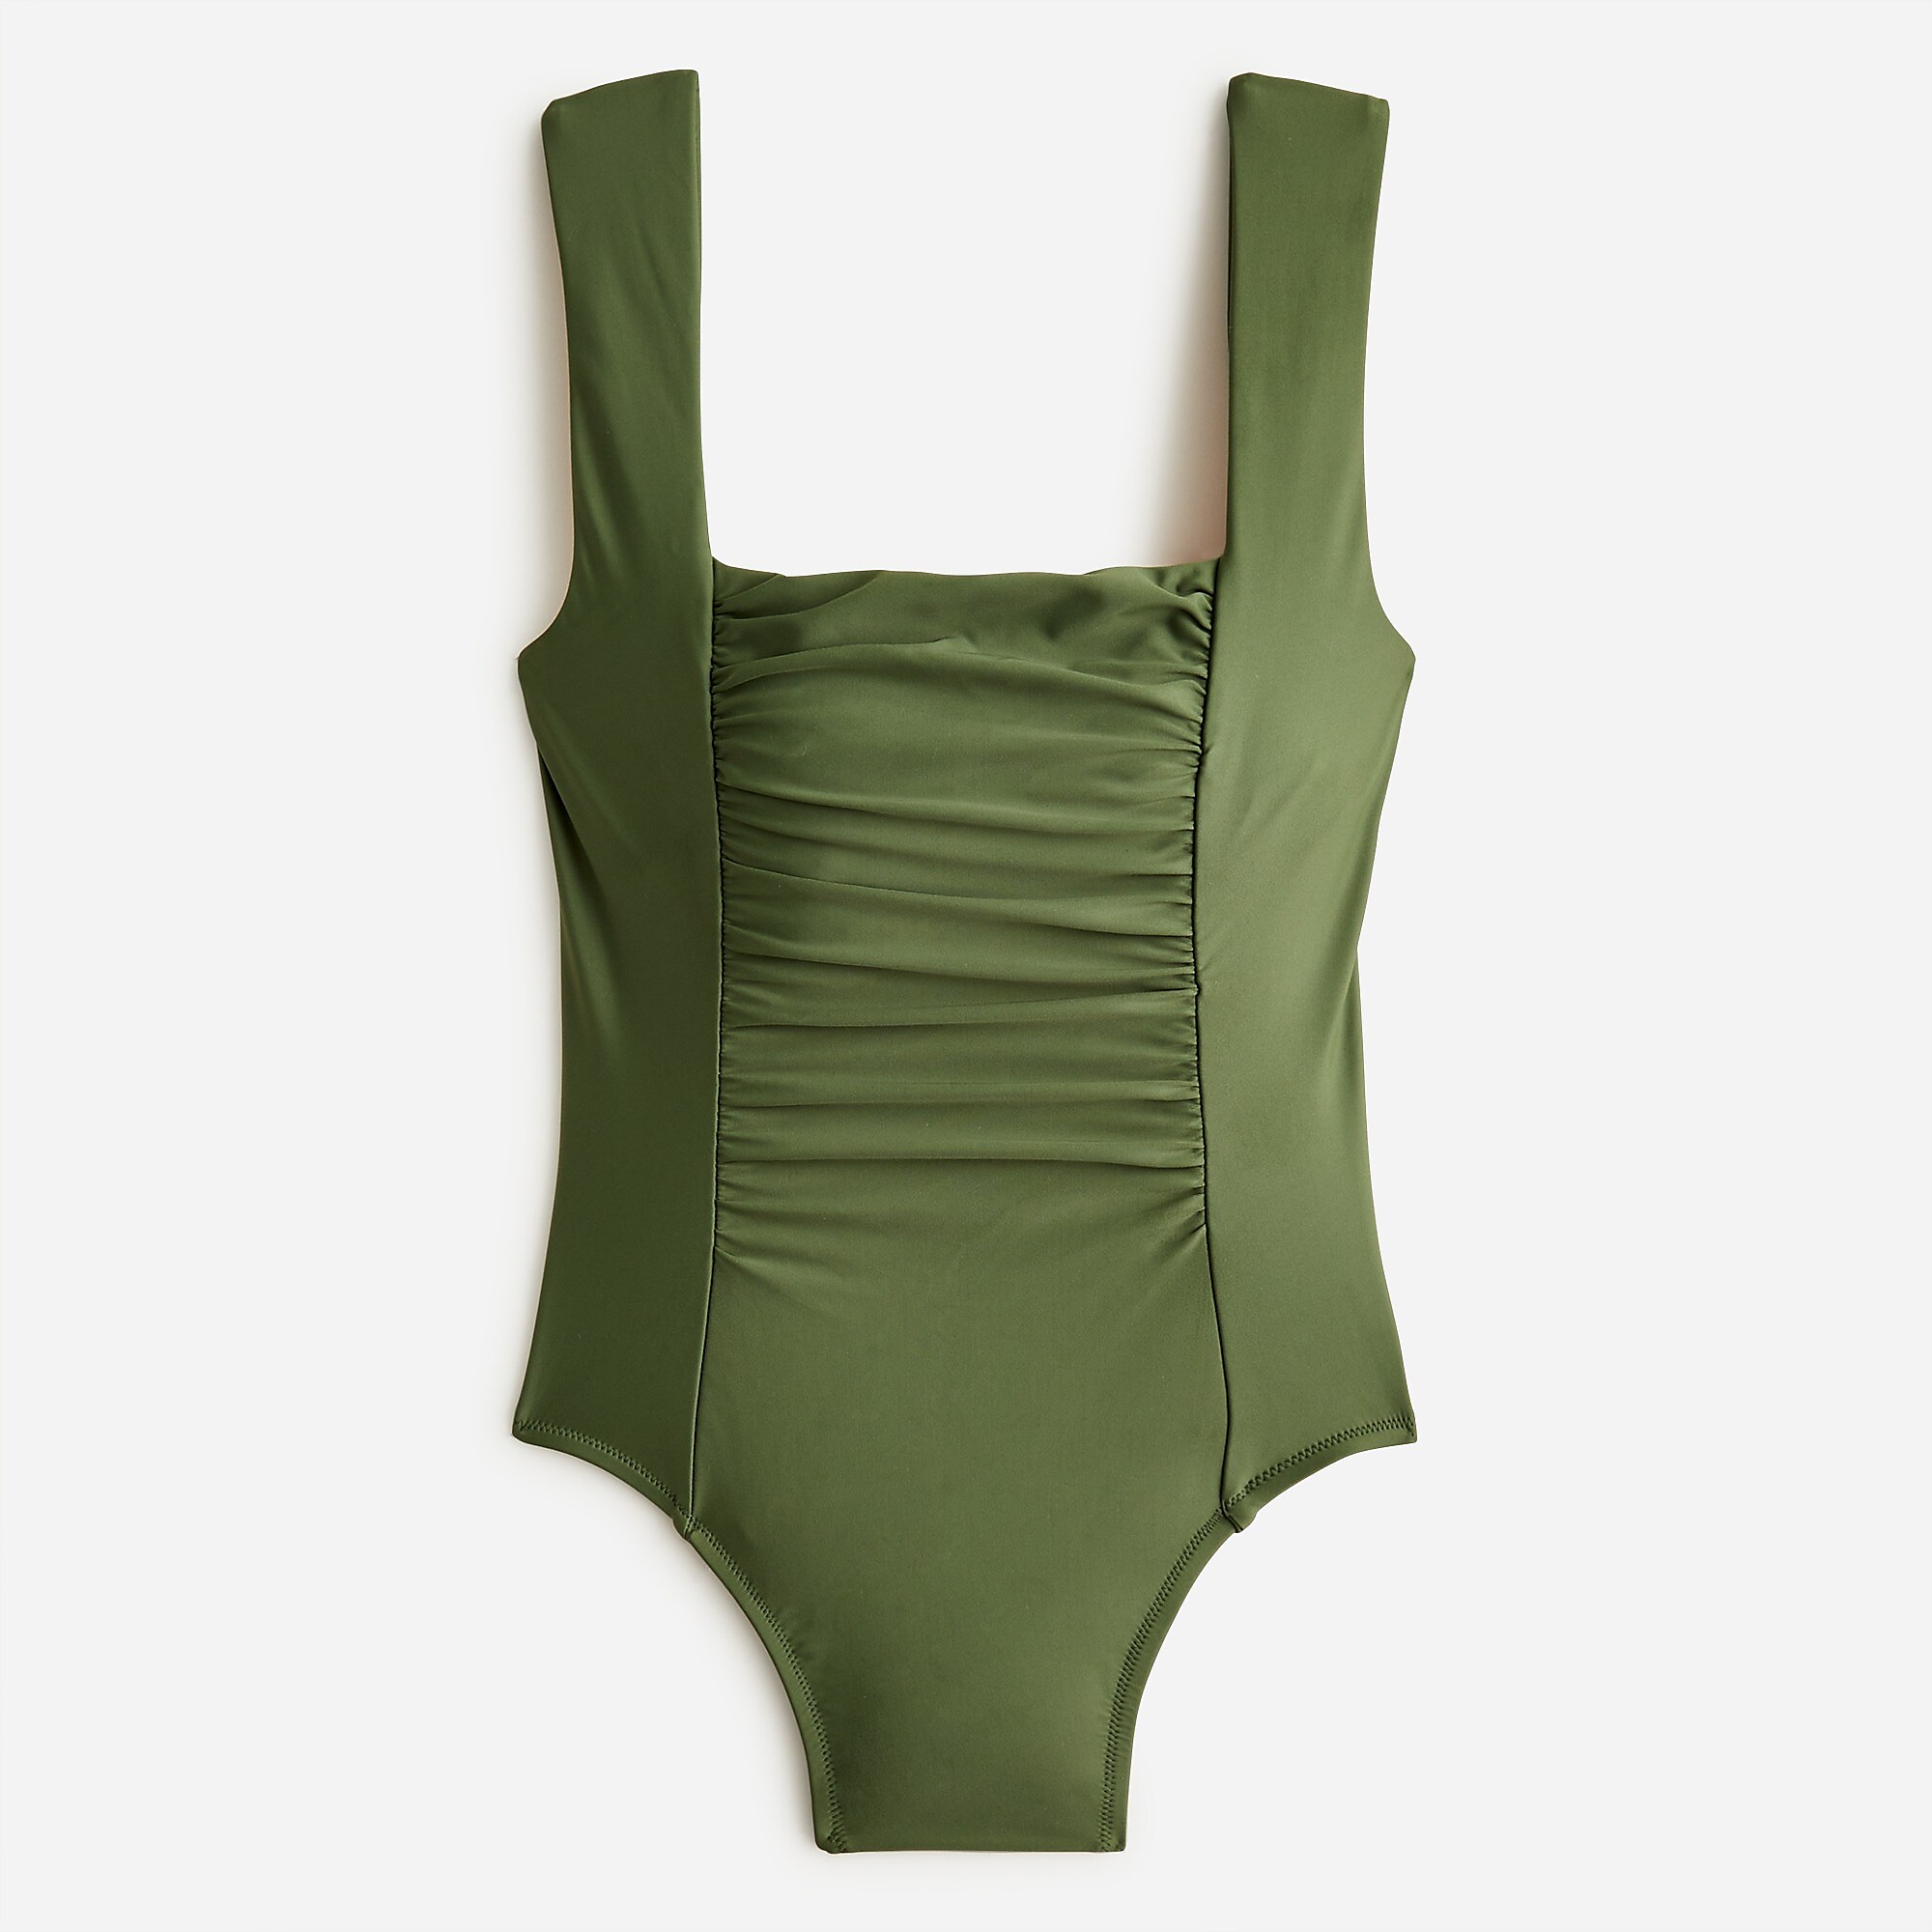 Ruched squareneck one-piece reduces to $19.80